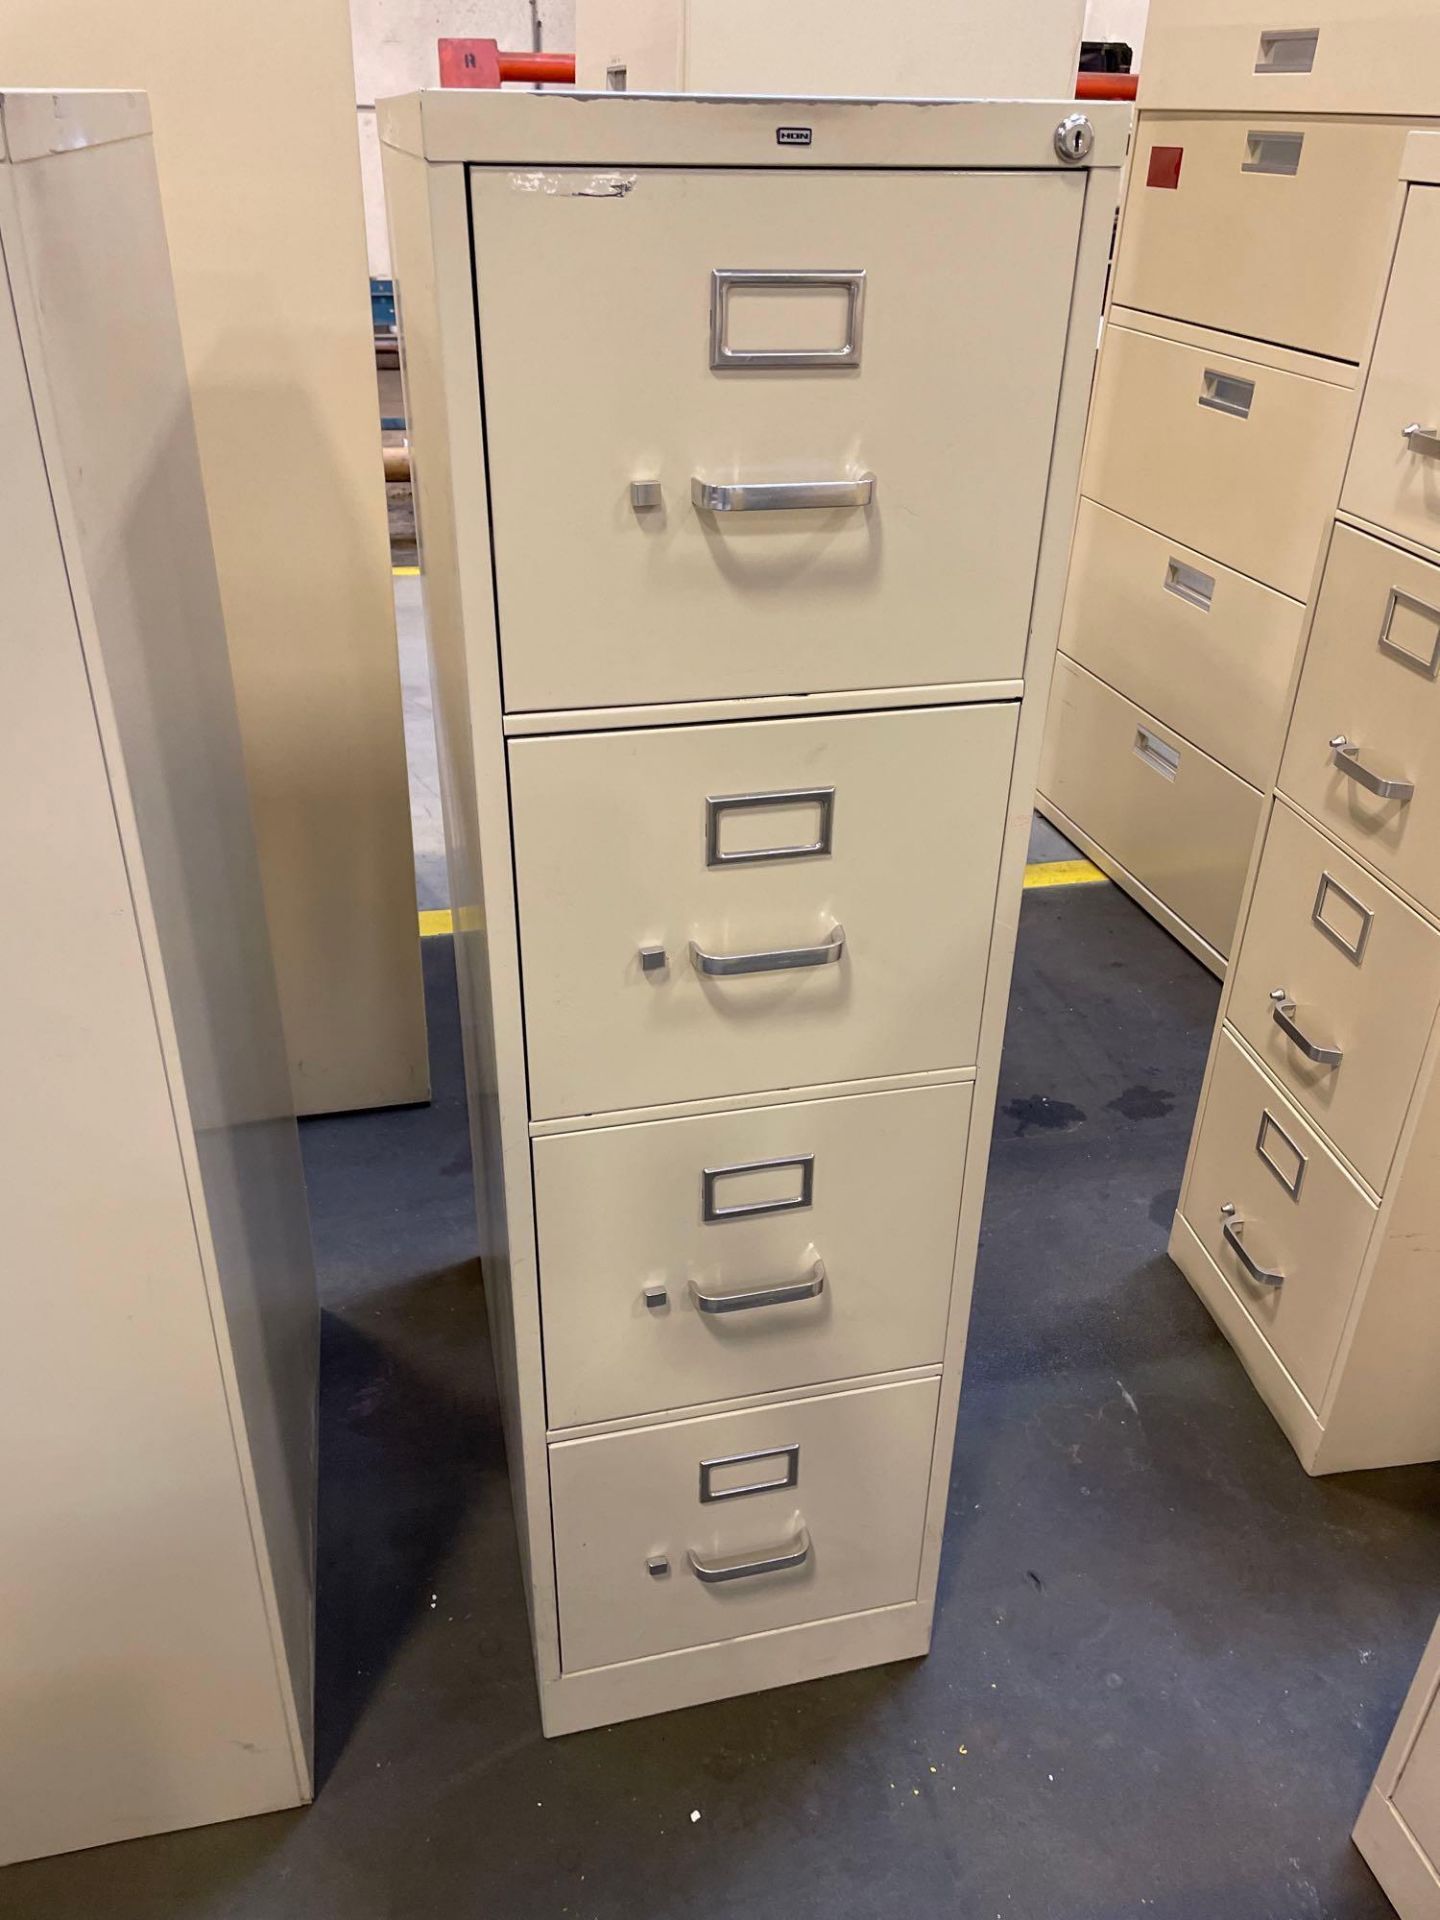 Lot of 5 Hon 4 Drawer File Cabinets: 25" X 15" X 52" - Image 5 of 5